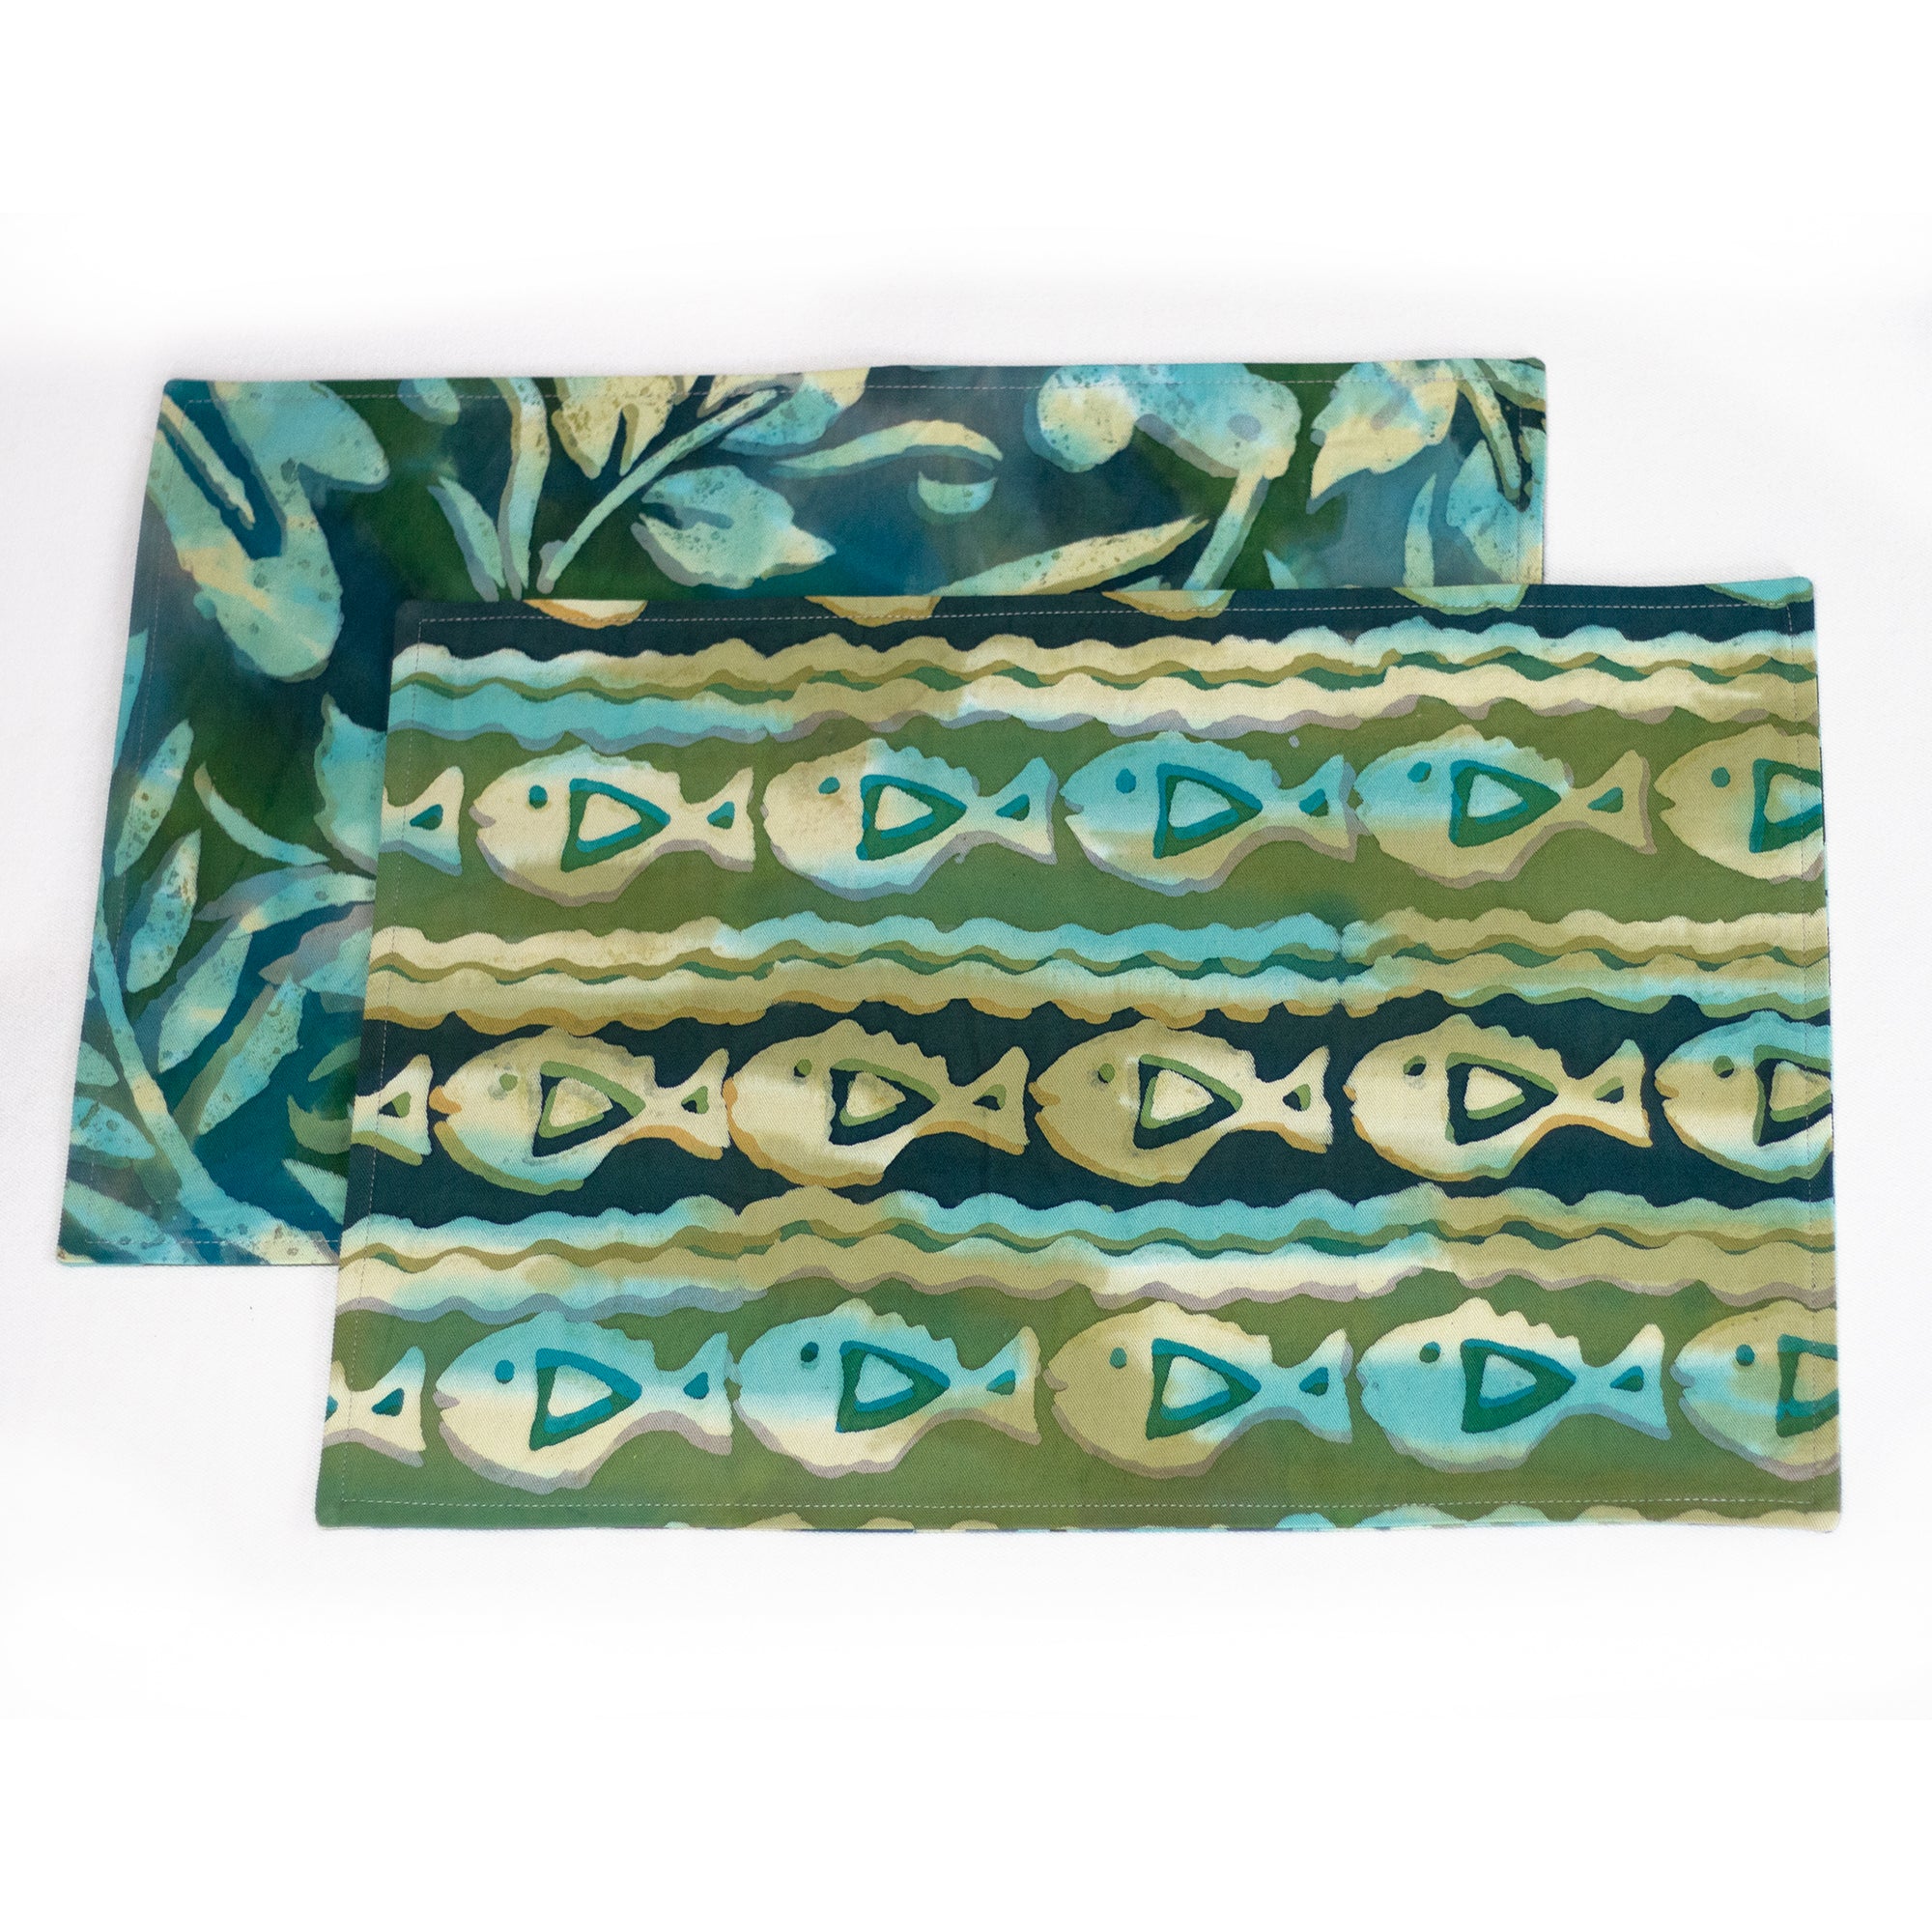 Hand Painted Placemats, Napkins, and Table Runners - LilyPond/PiranhasParade